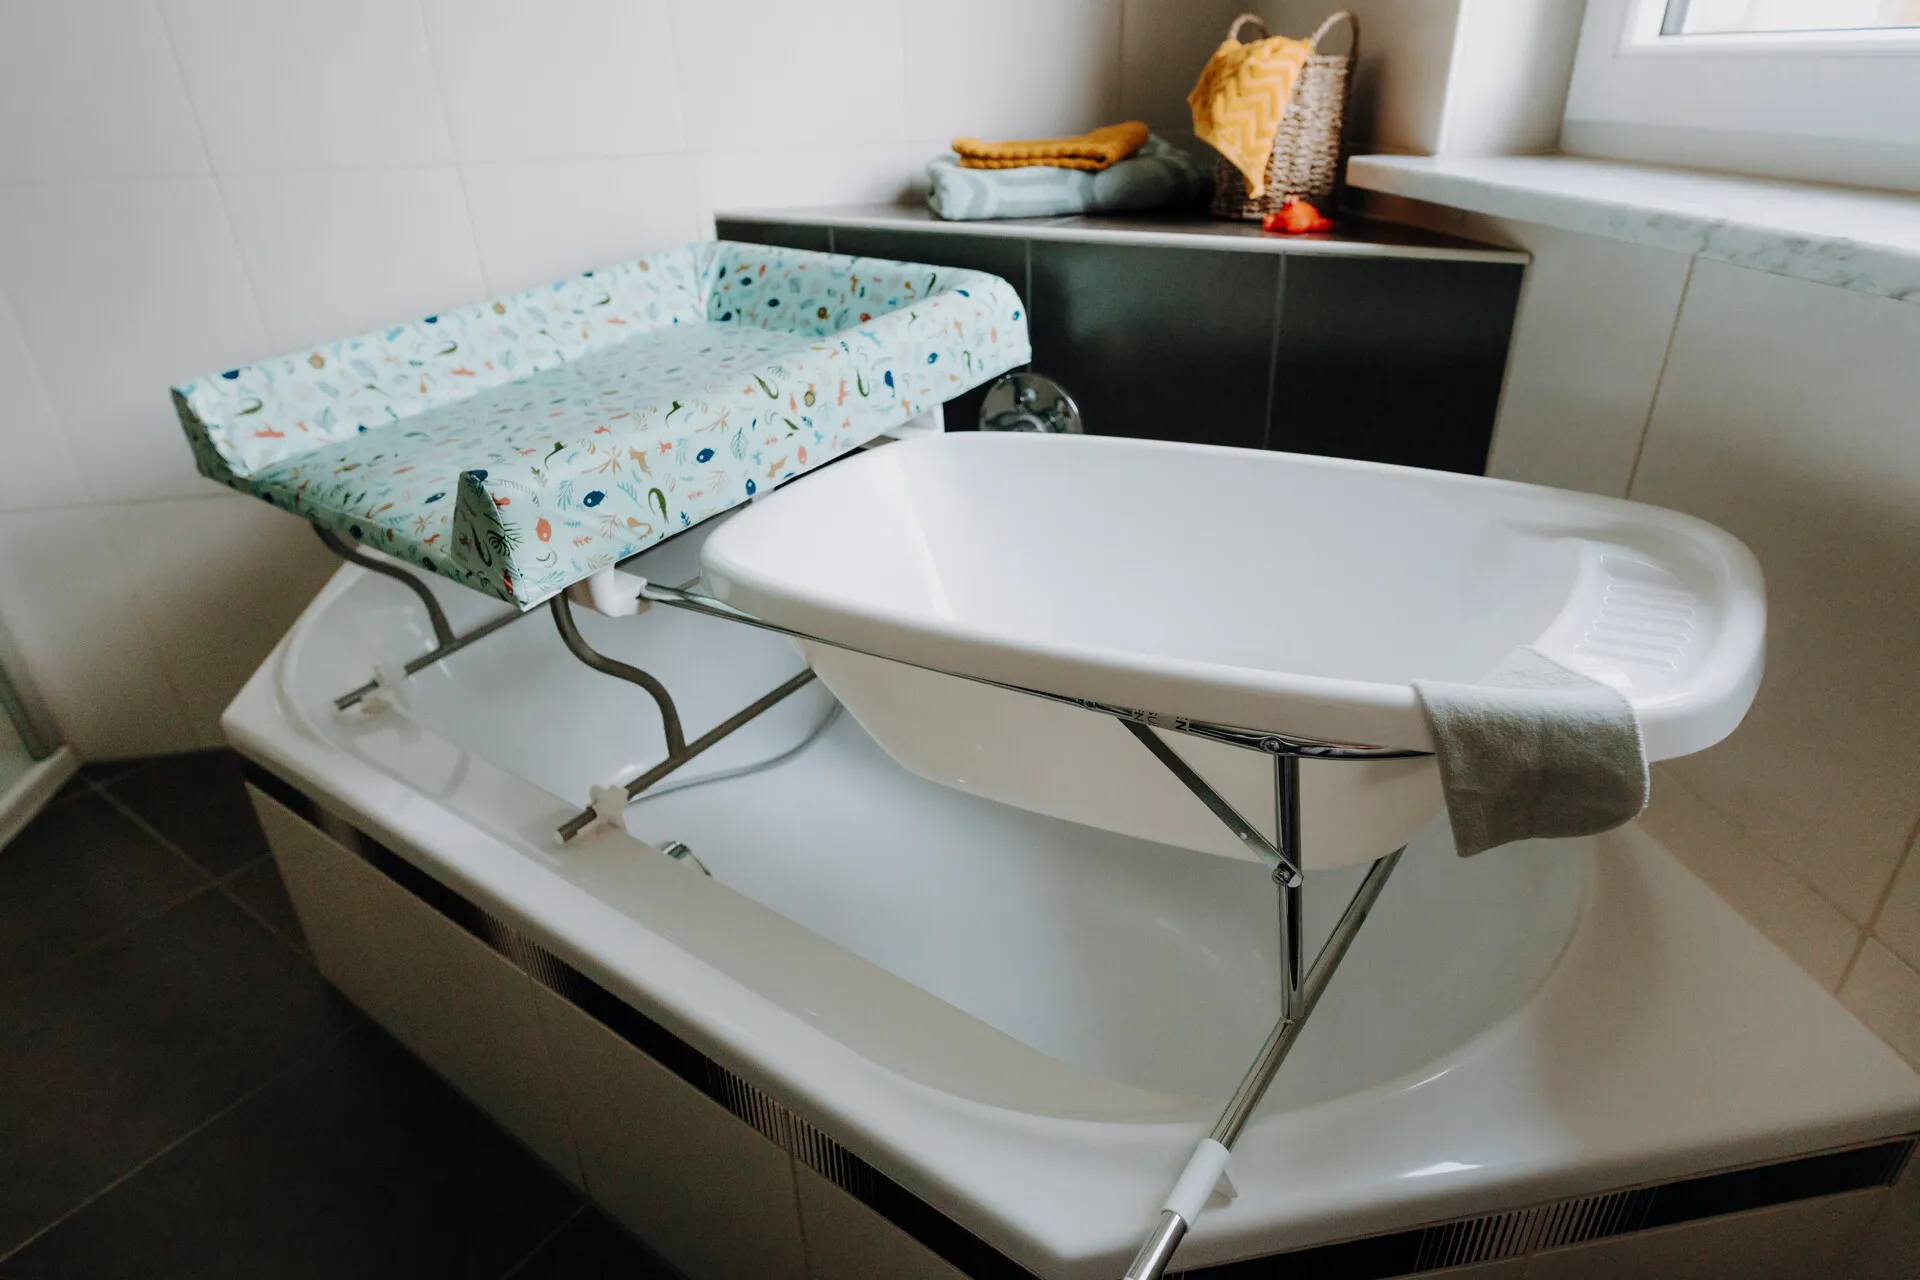 Varix combined bath and changing table solution